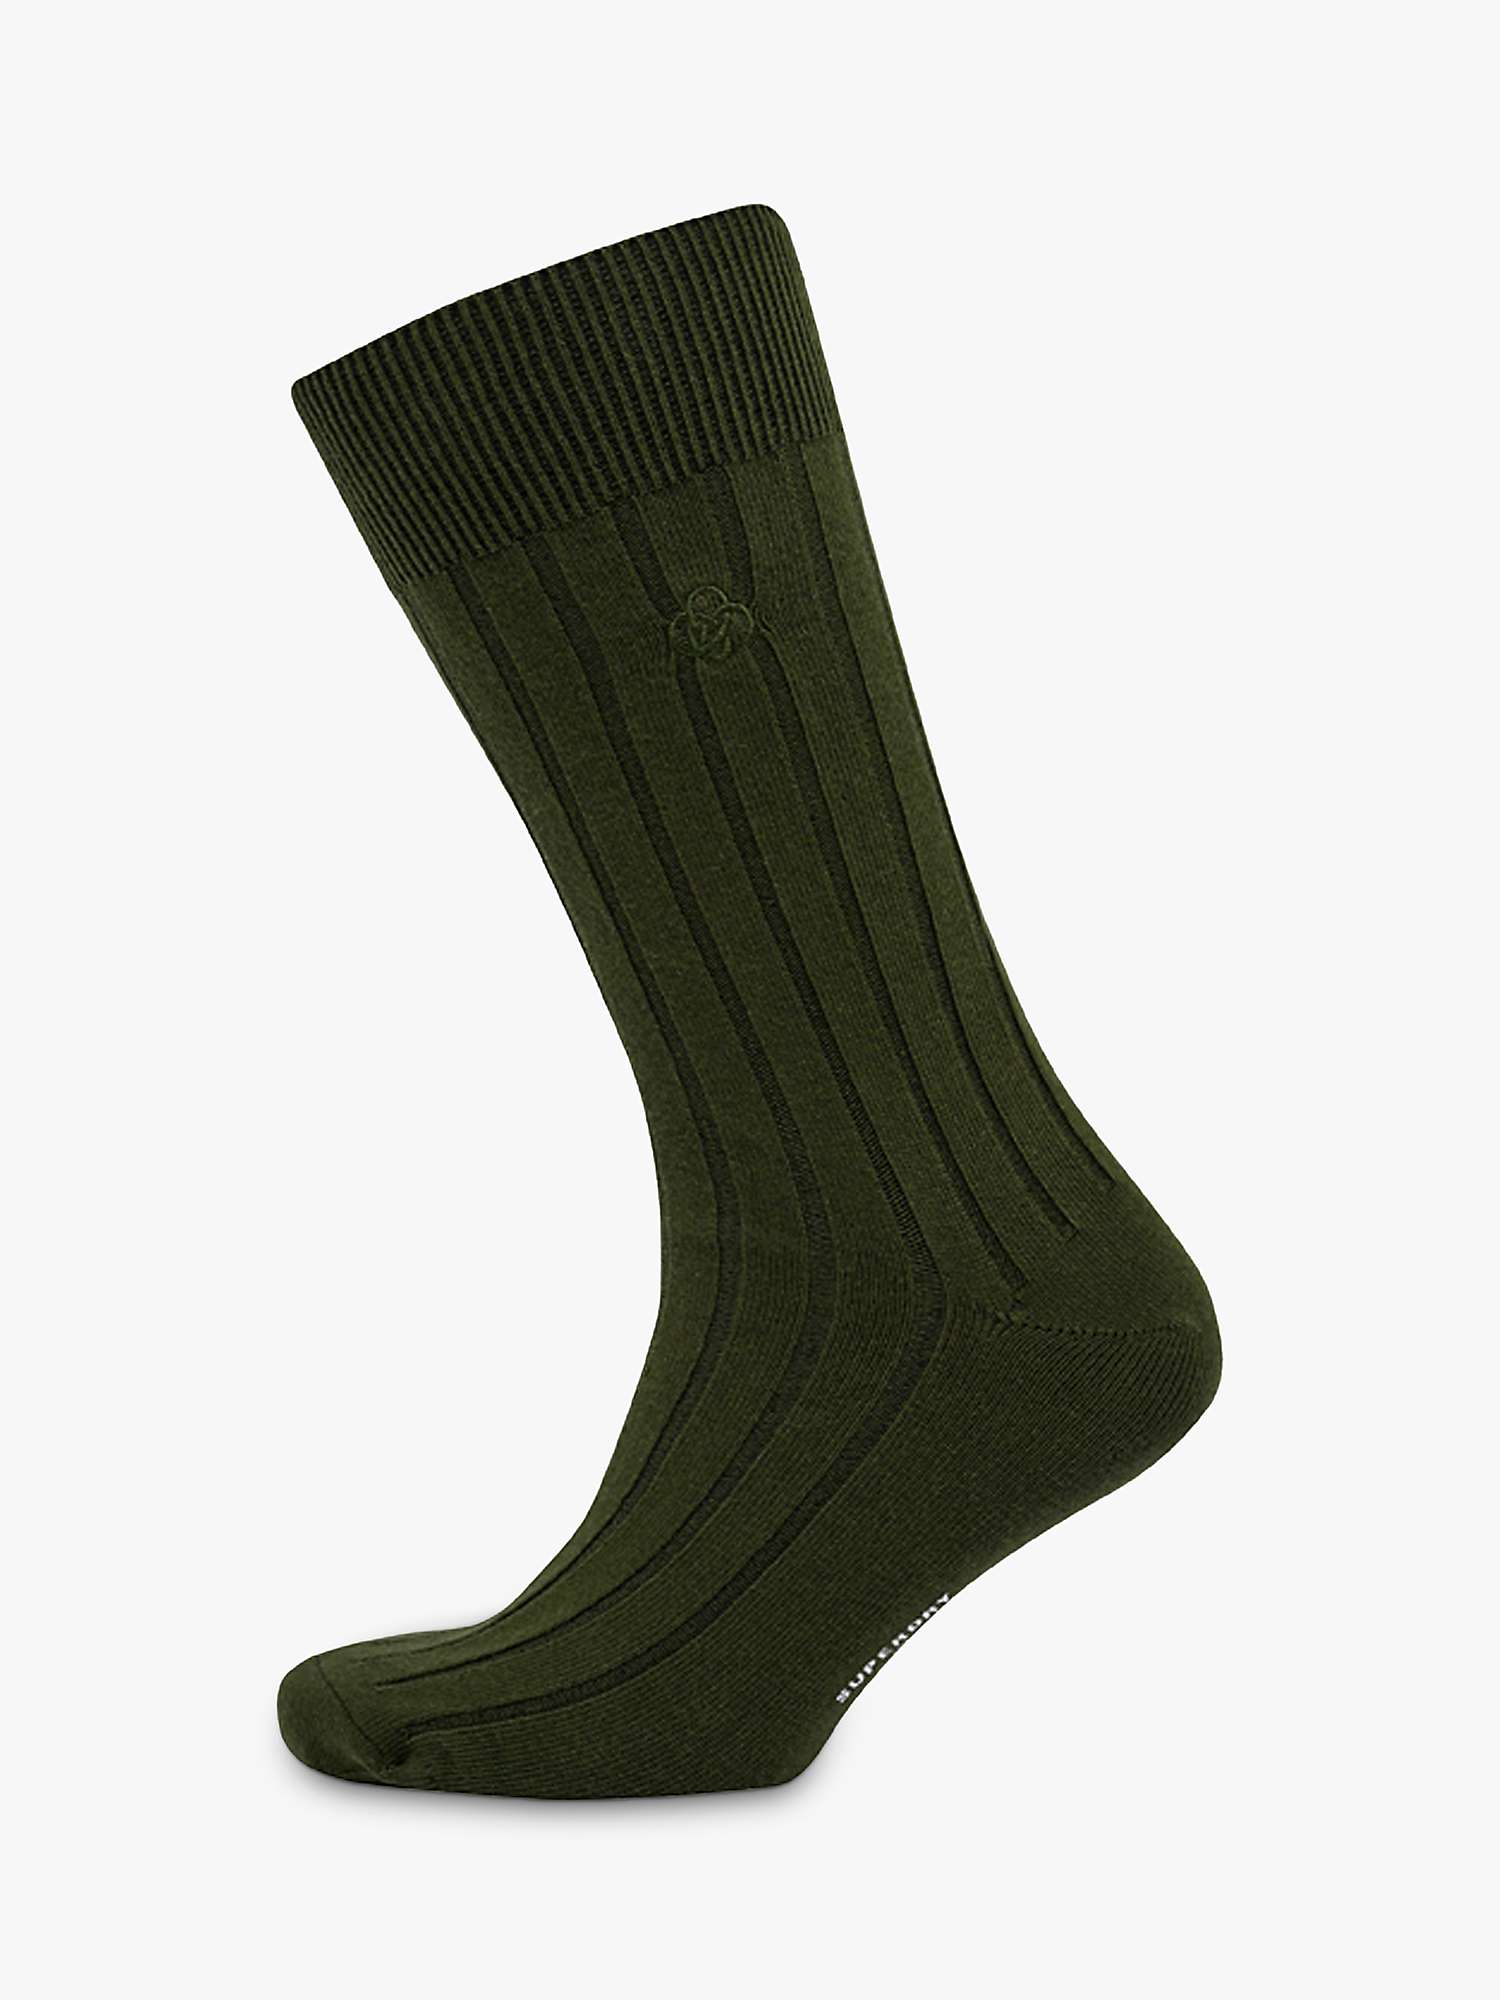 Buy Superdry Organic Cotton Blend Core Ribbed Socks Online at johnlewis.com